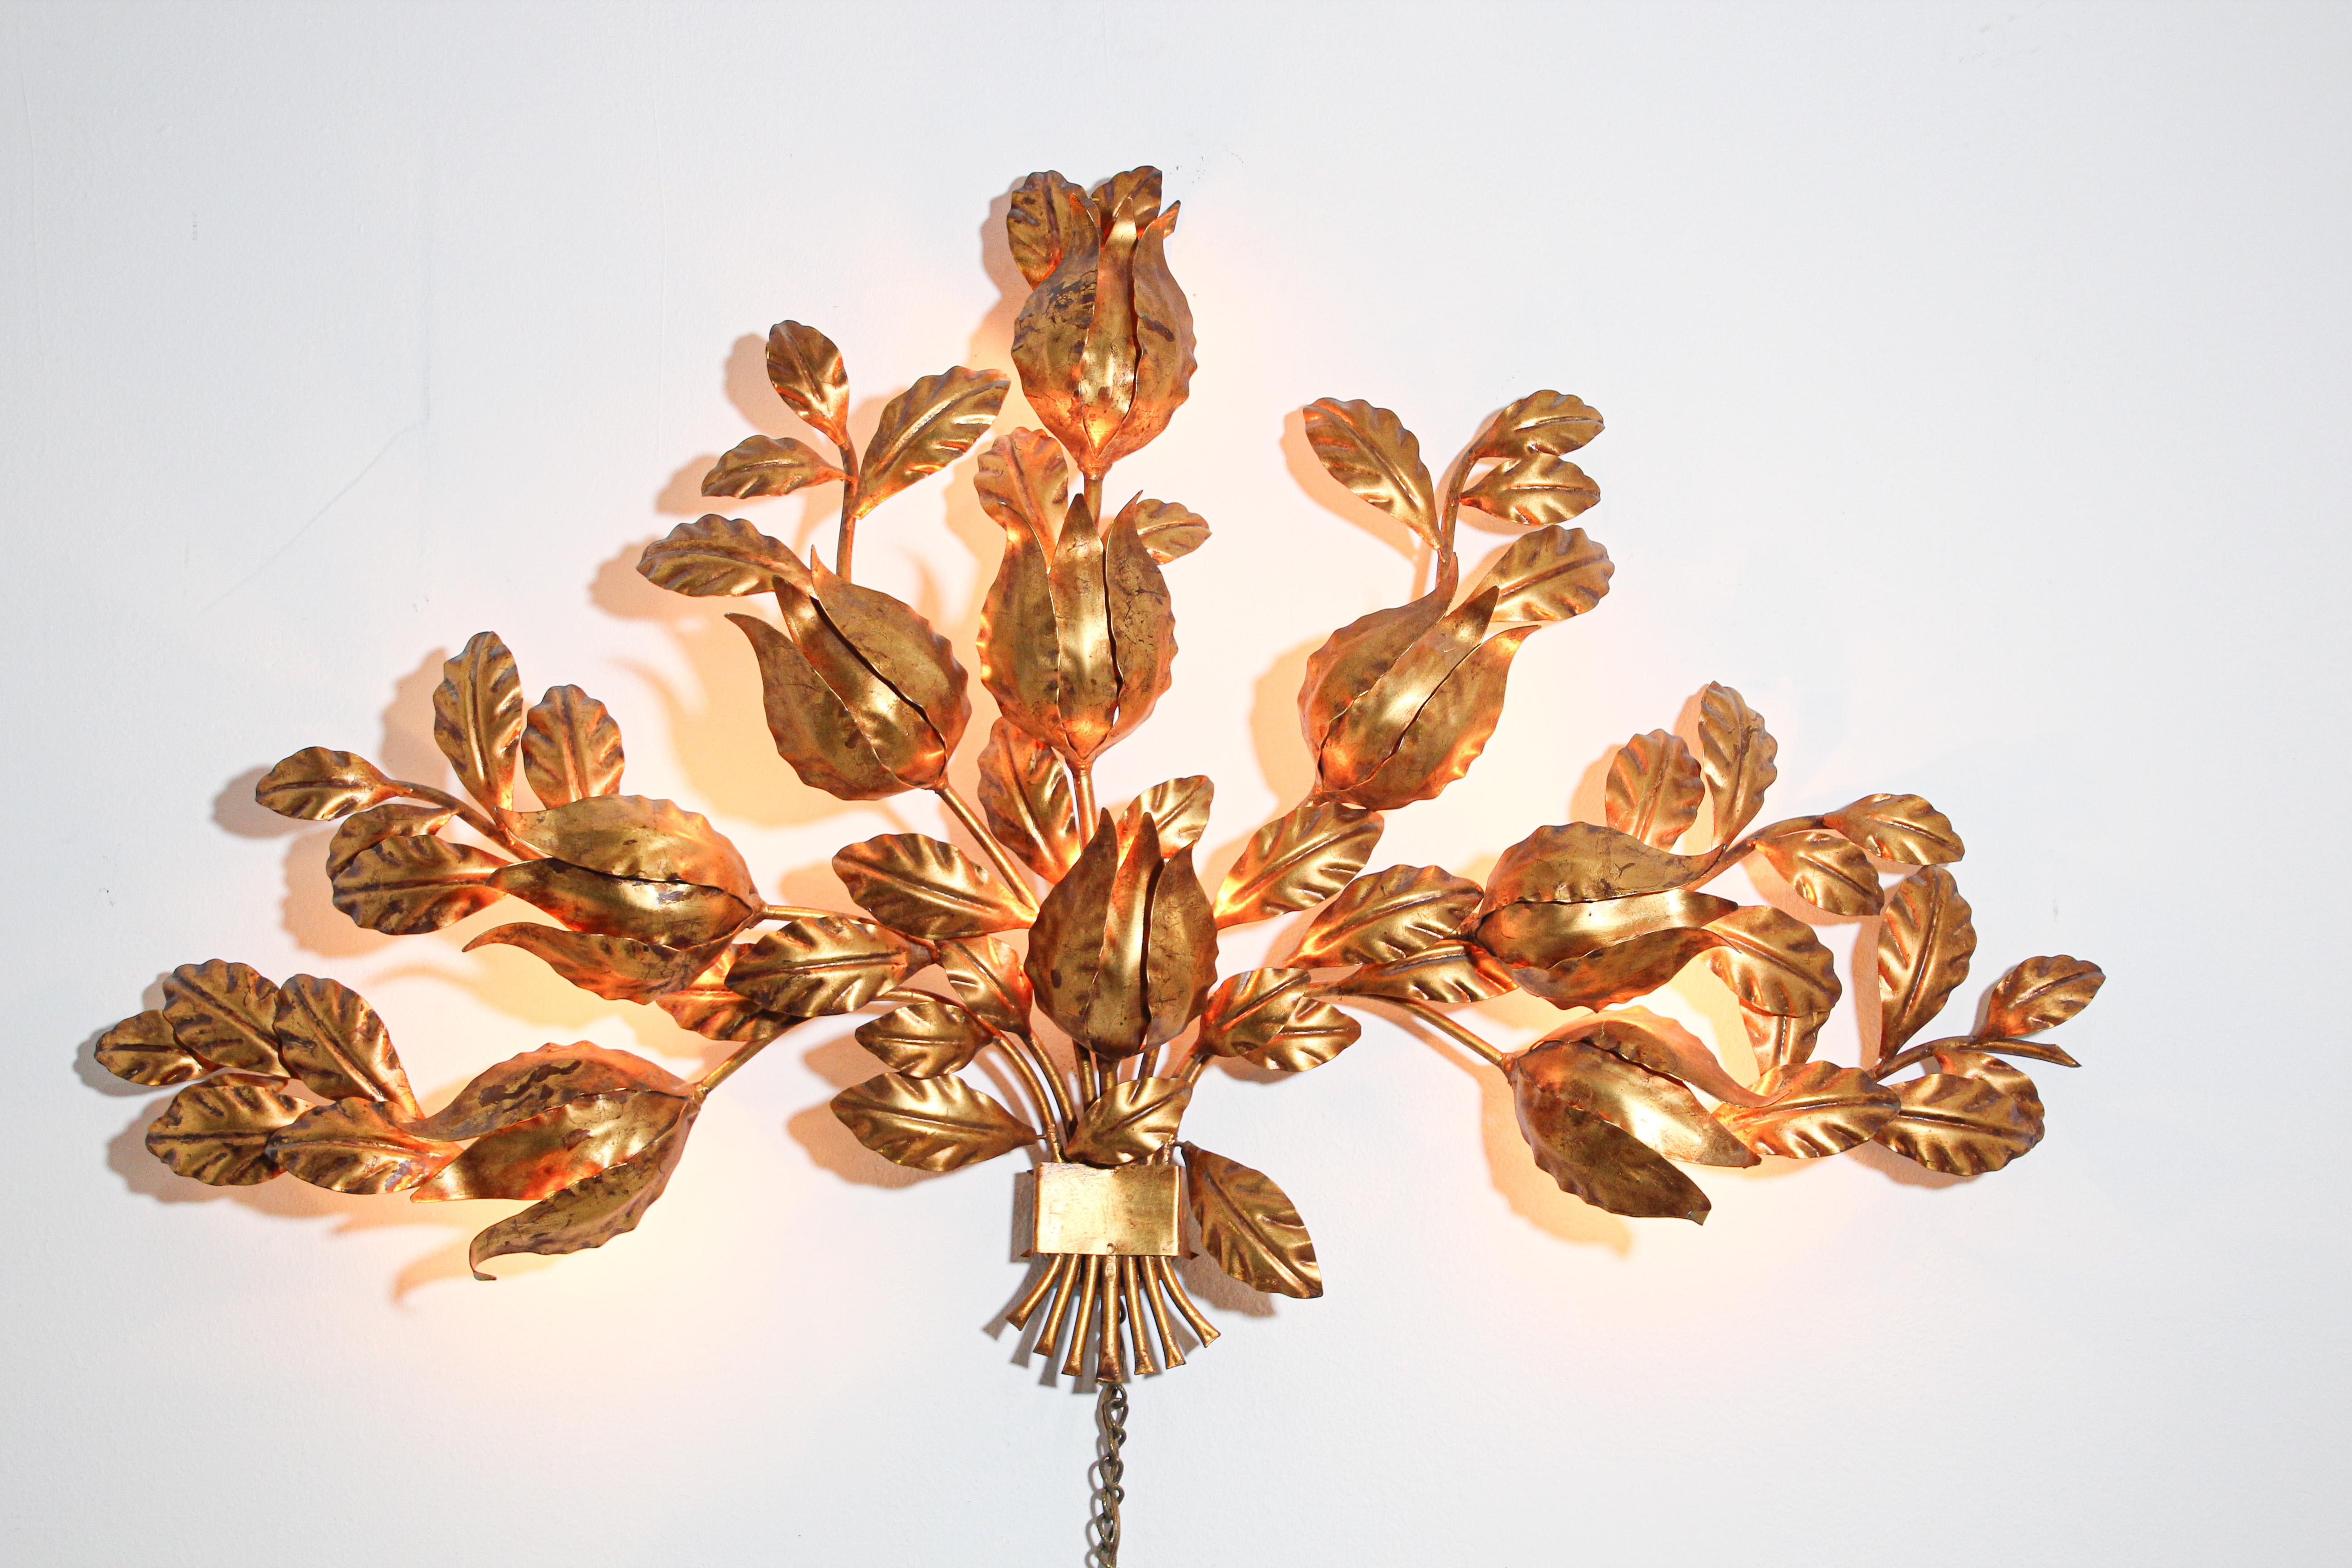 An Italian 1950s Hollywood Regency gilt metal sheaf of leaves wall sconce
Very glamorous, very Hollywood Regency gold leaf gilded metal Italian tole wall sconce with leaves and flowers.
Very large midcentury Italian lighted gilt tole frame consist